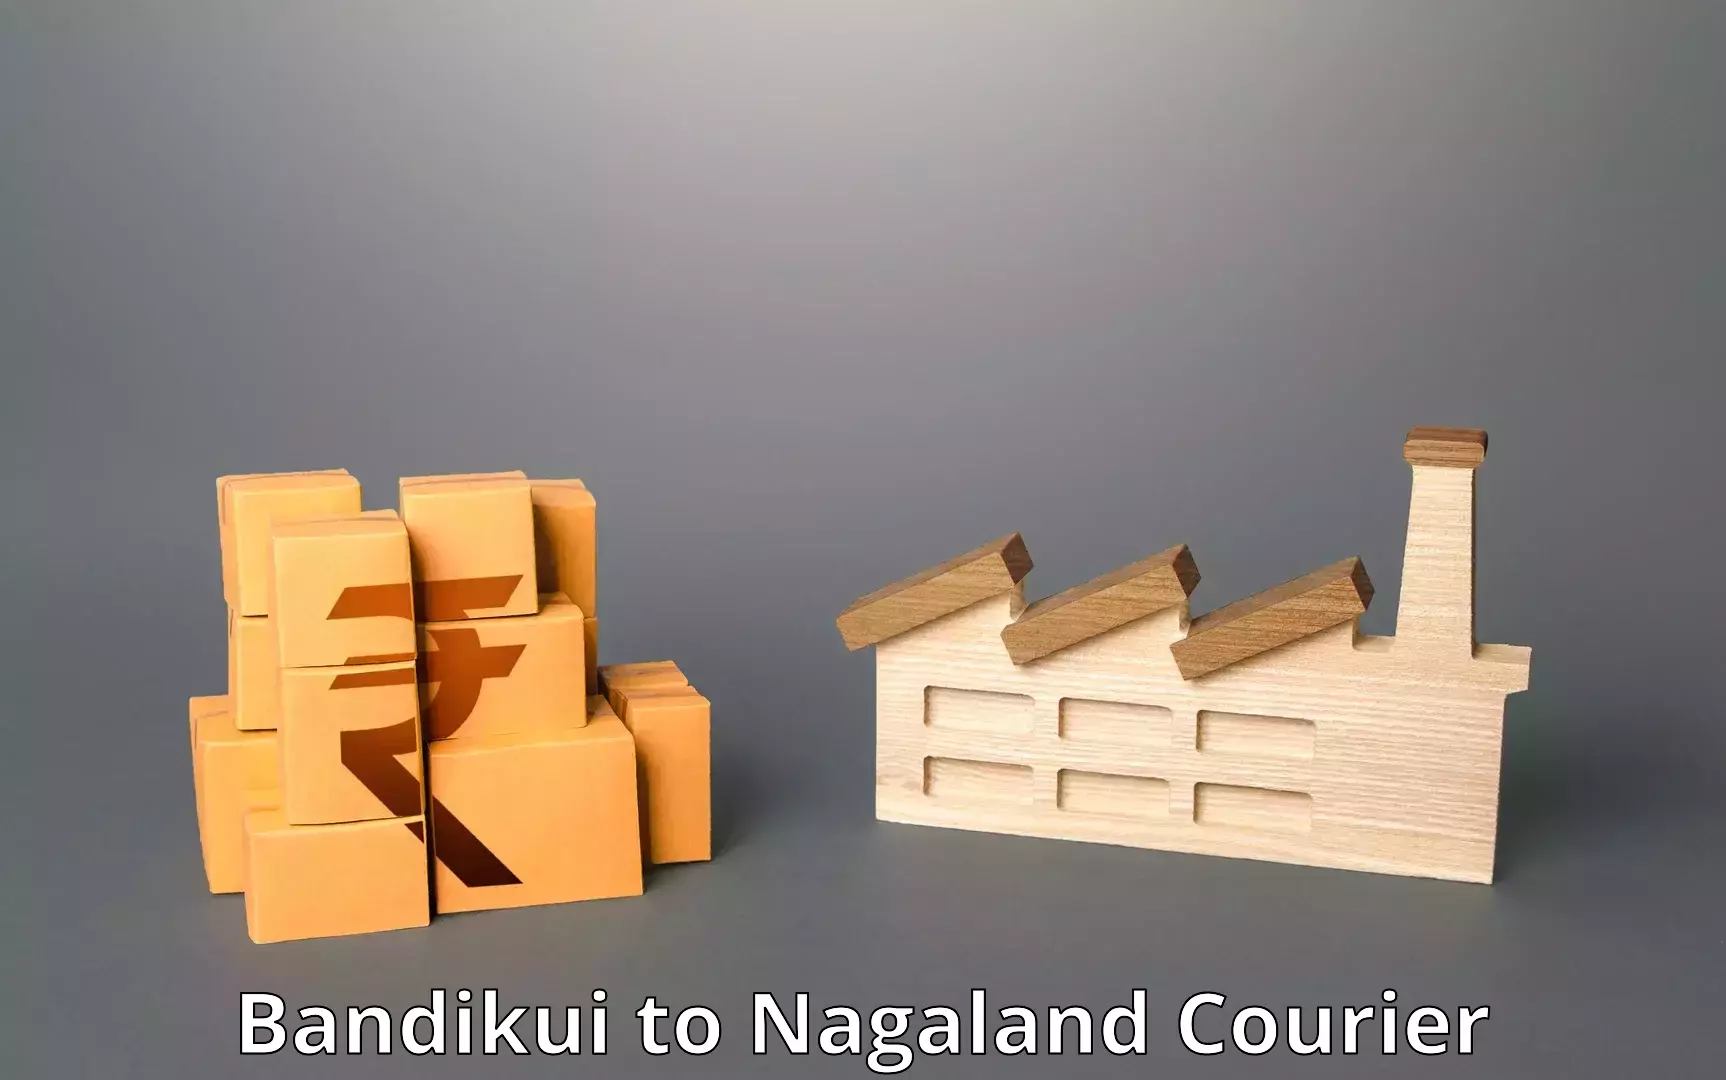 End-to-end delivery Bandikui to Nagaland